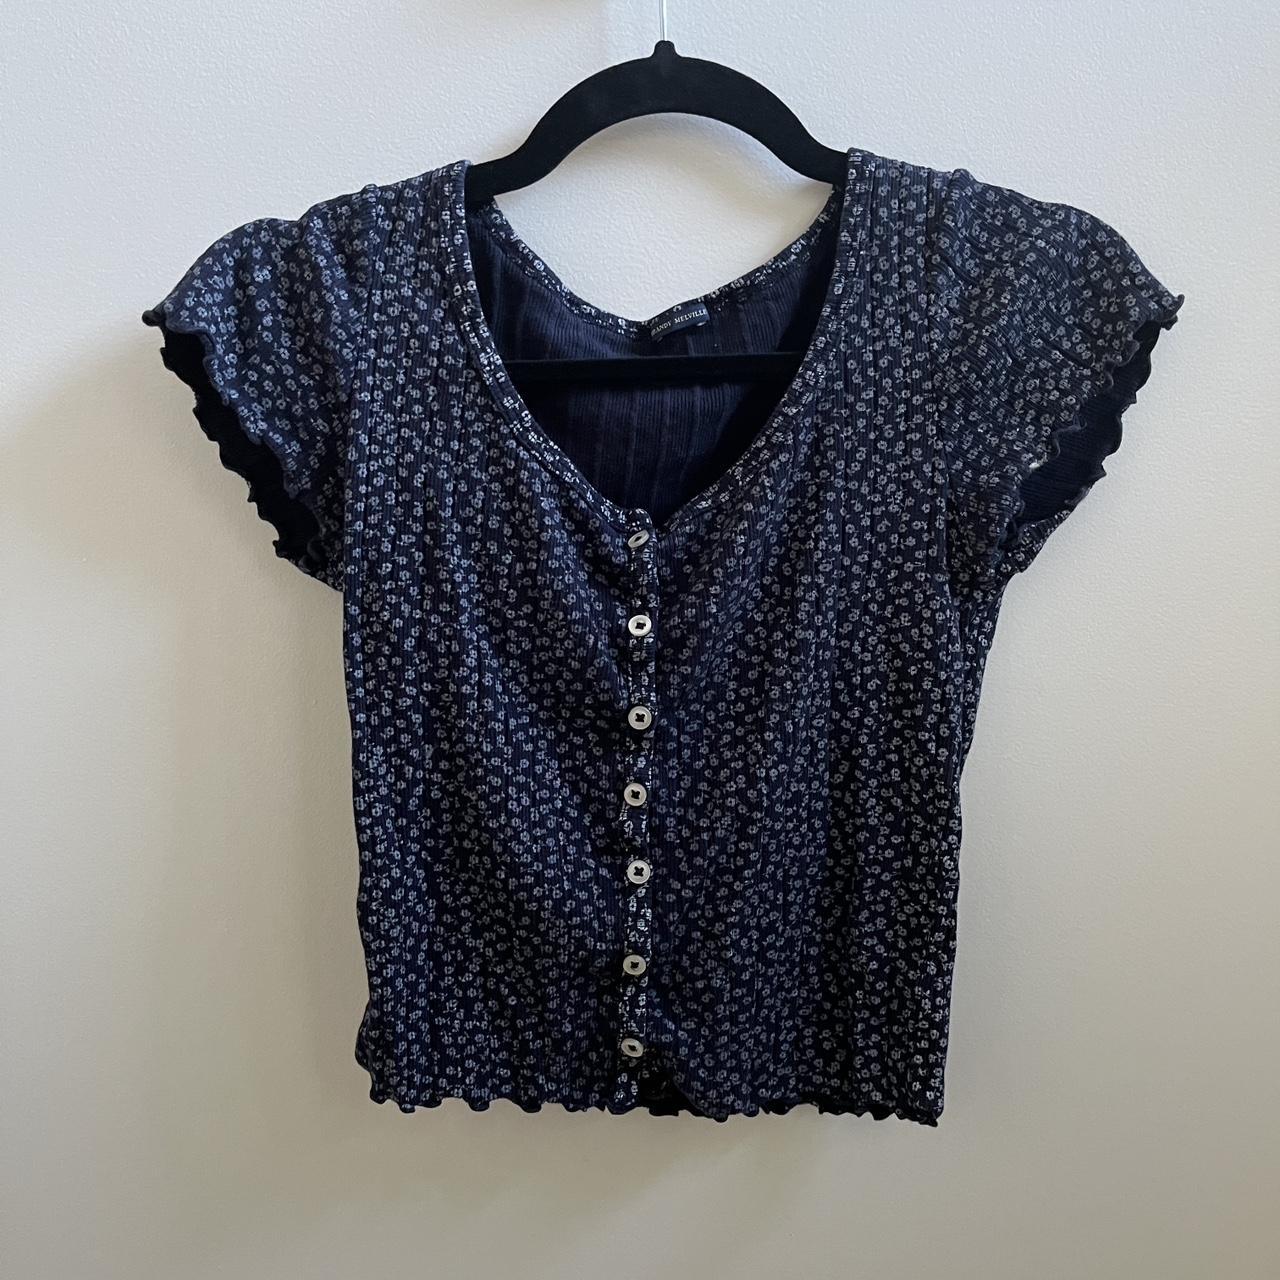 Brandy Melville Zelly Button Up Top. Navy and... - Depop